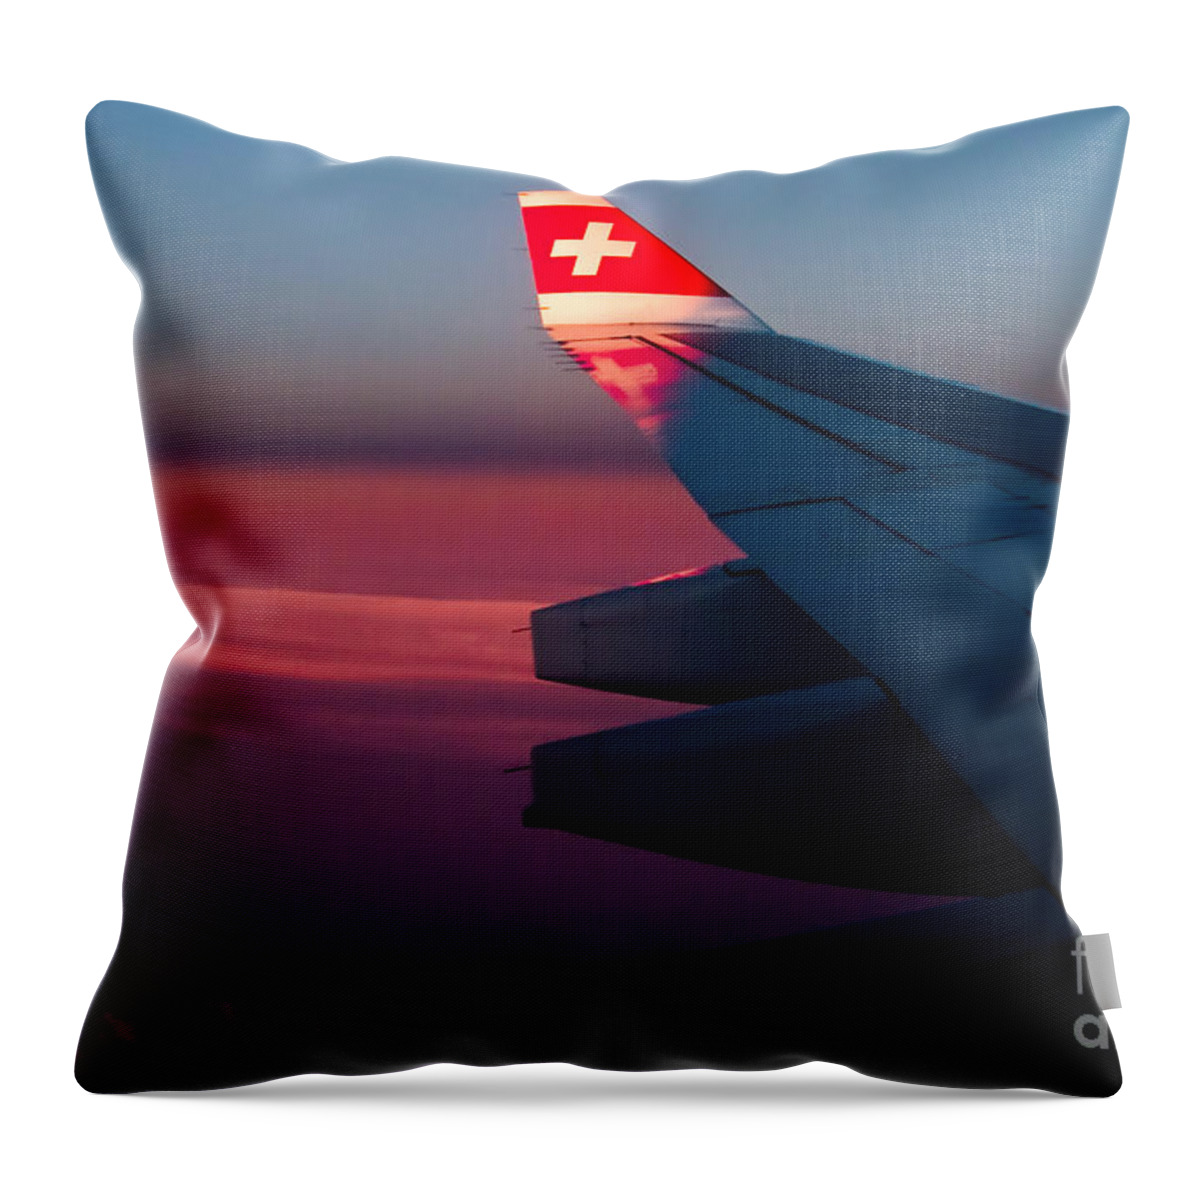 Swiss Throw Pillow featuring the photograph First Sunlight by Syed Aqueel